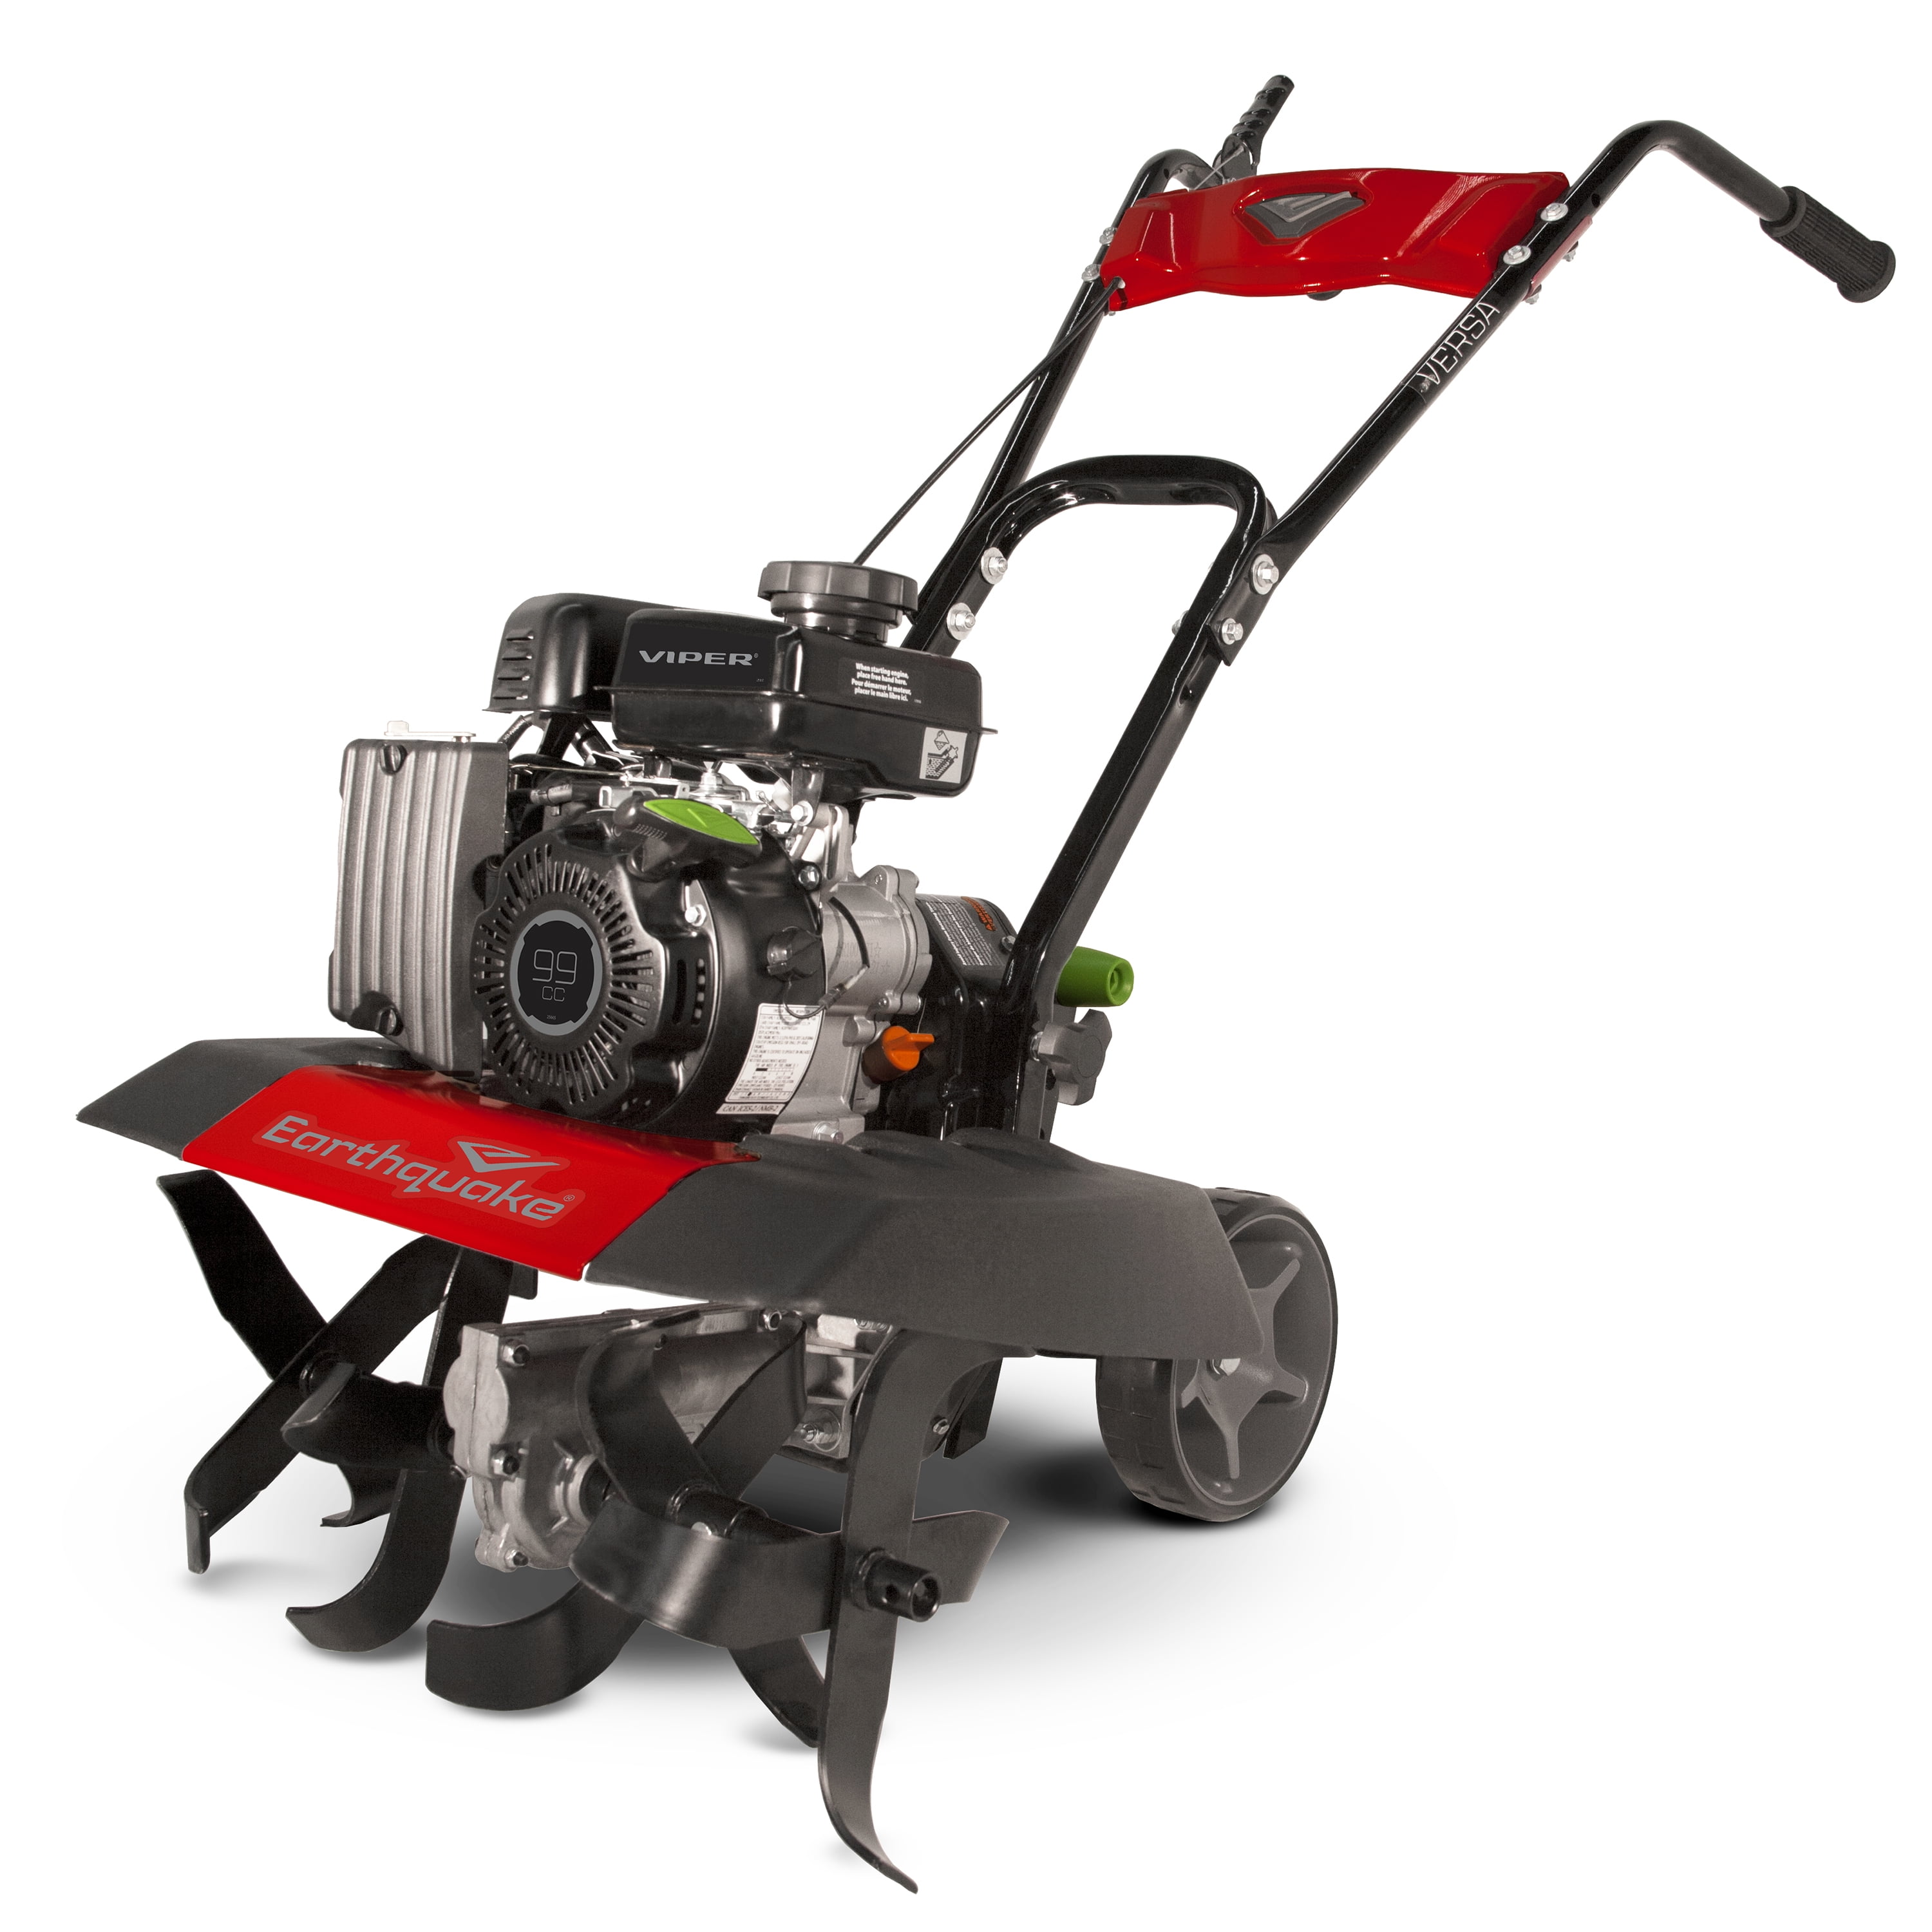 Earthquake Badger Front Tine Tiller Adjustable Tilling Width Two-Position Wheel Assembly Model: 38040 Powerful 140cc 4-Cycle Briggs and Stratton Engine 